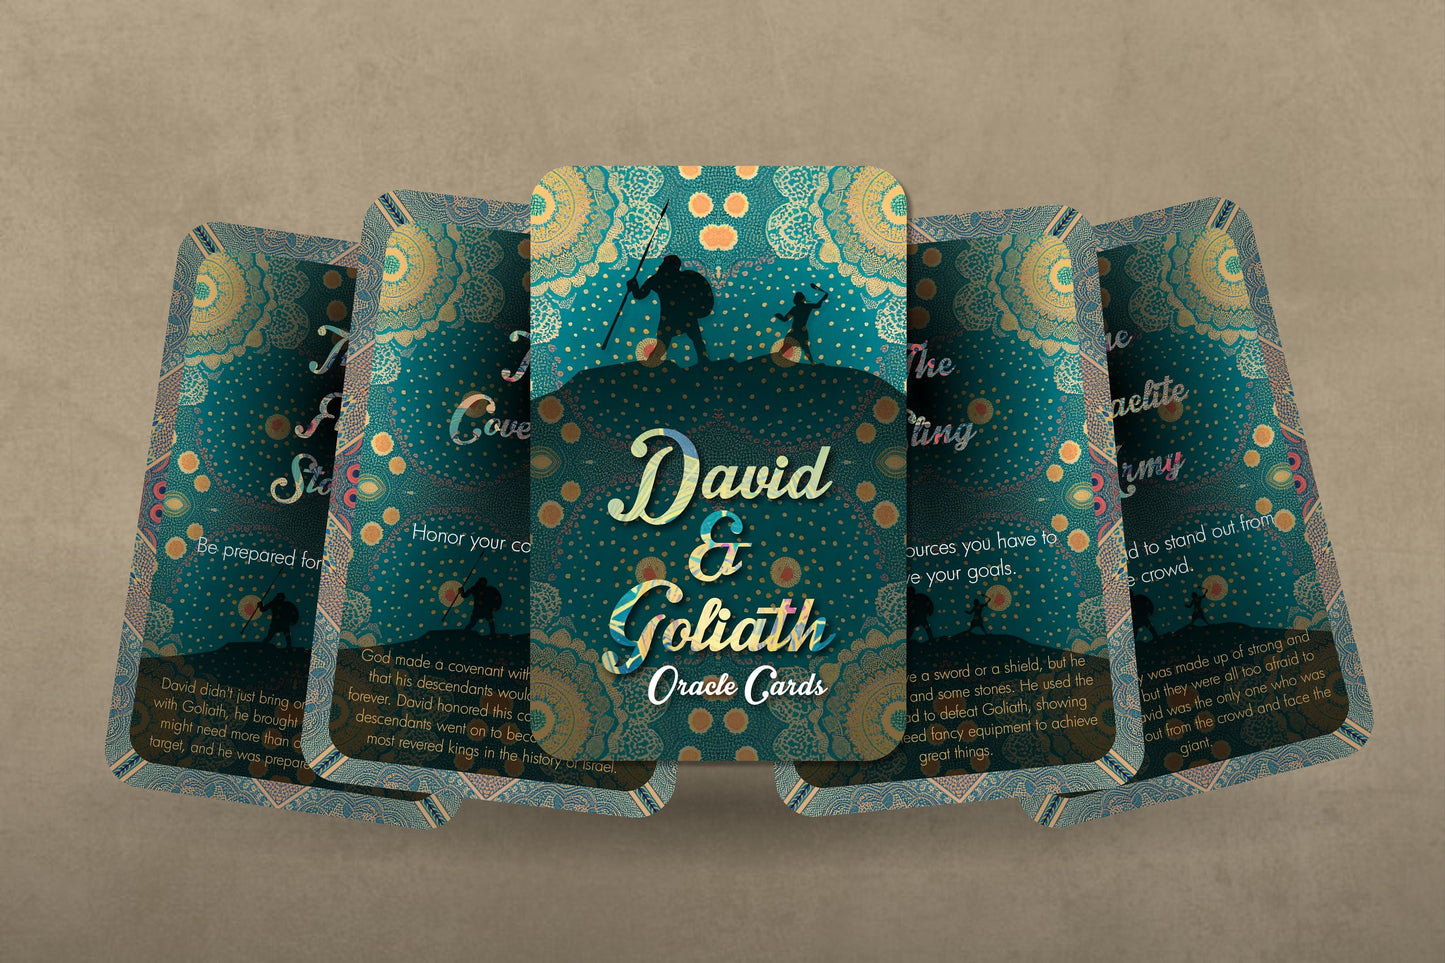 David and Goliath - Oracle cards